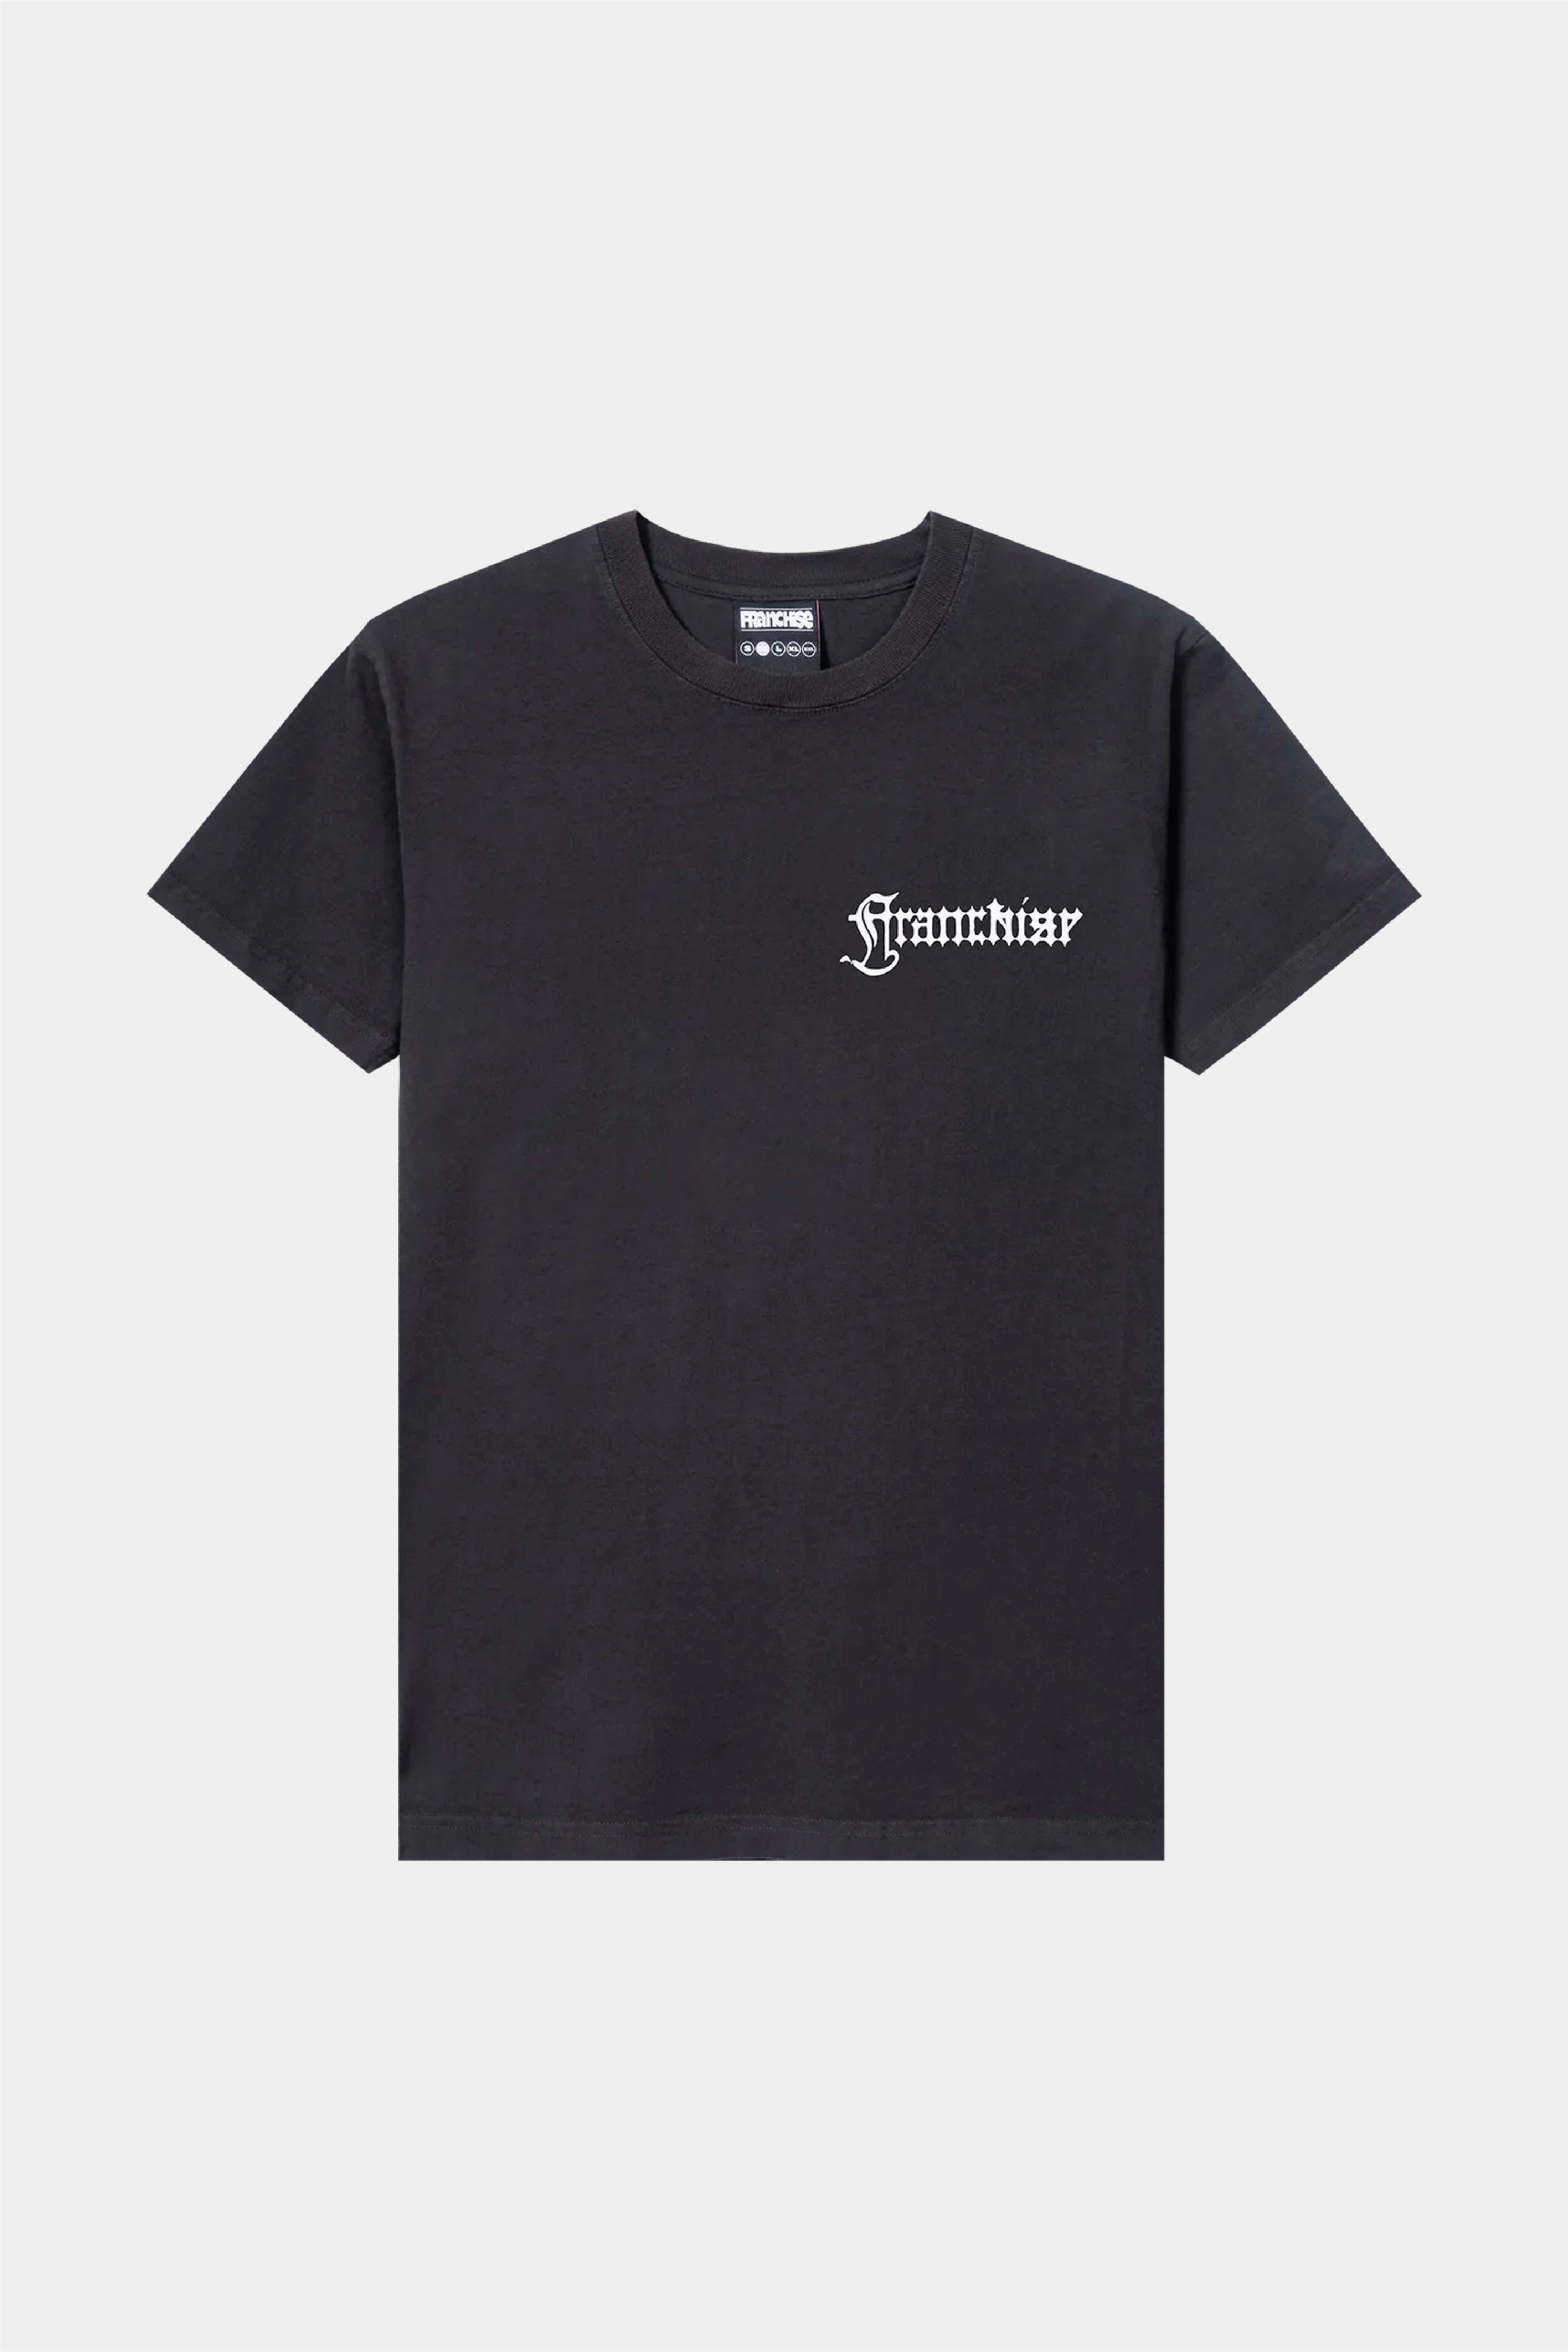 Selectshop FRAME - FRANCHISE Issue 07 SS Tee T-Shirts Concept Store Dubai